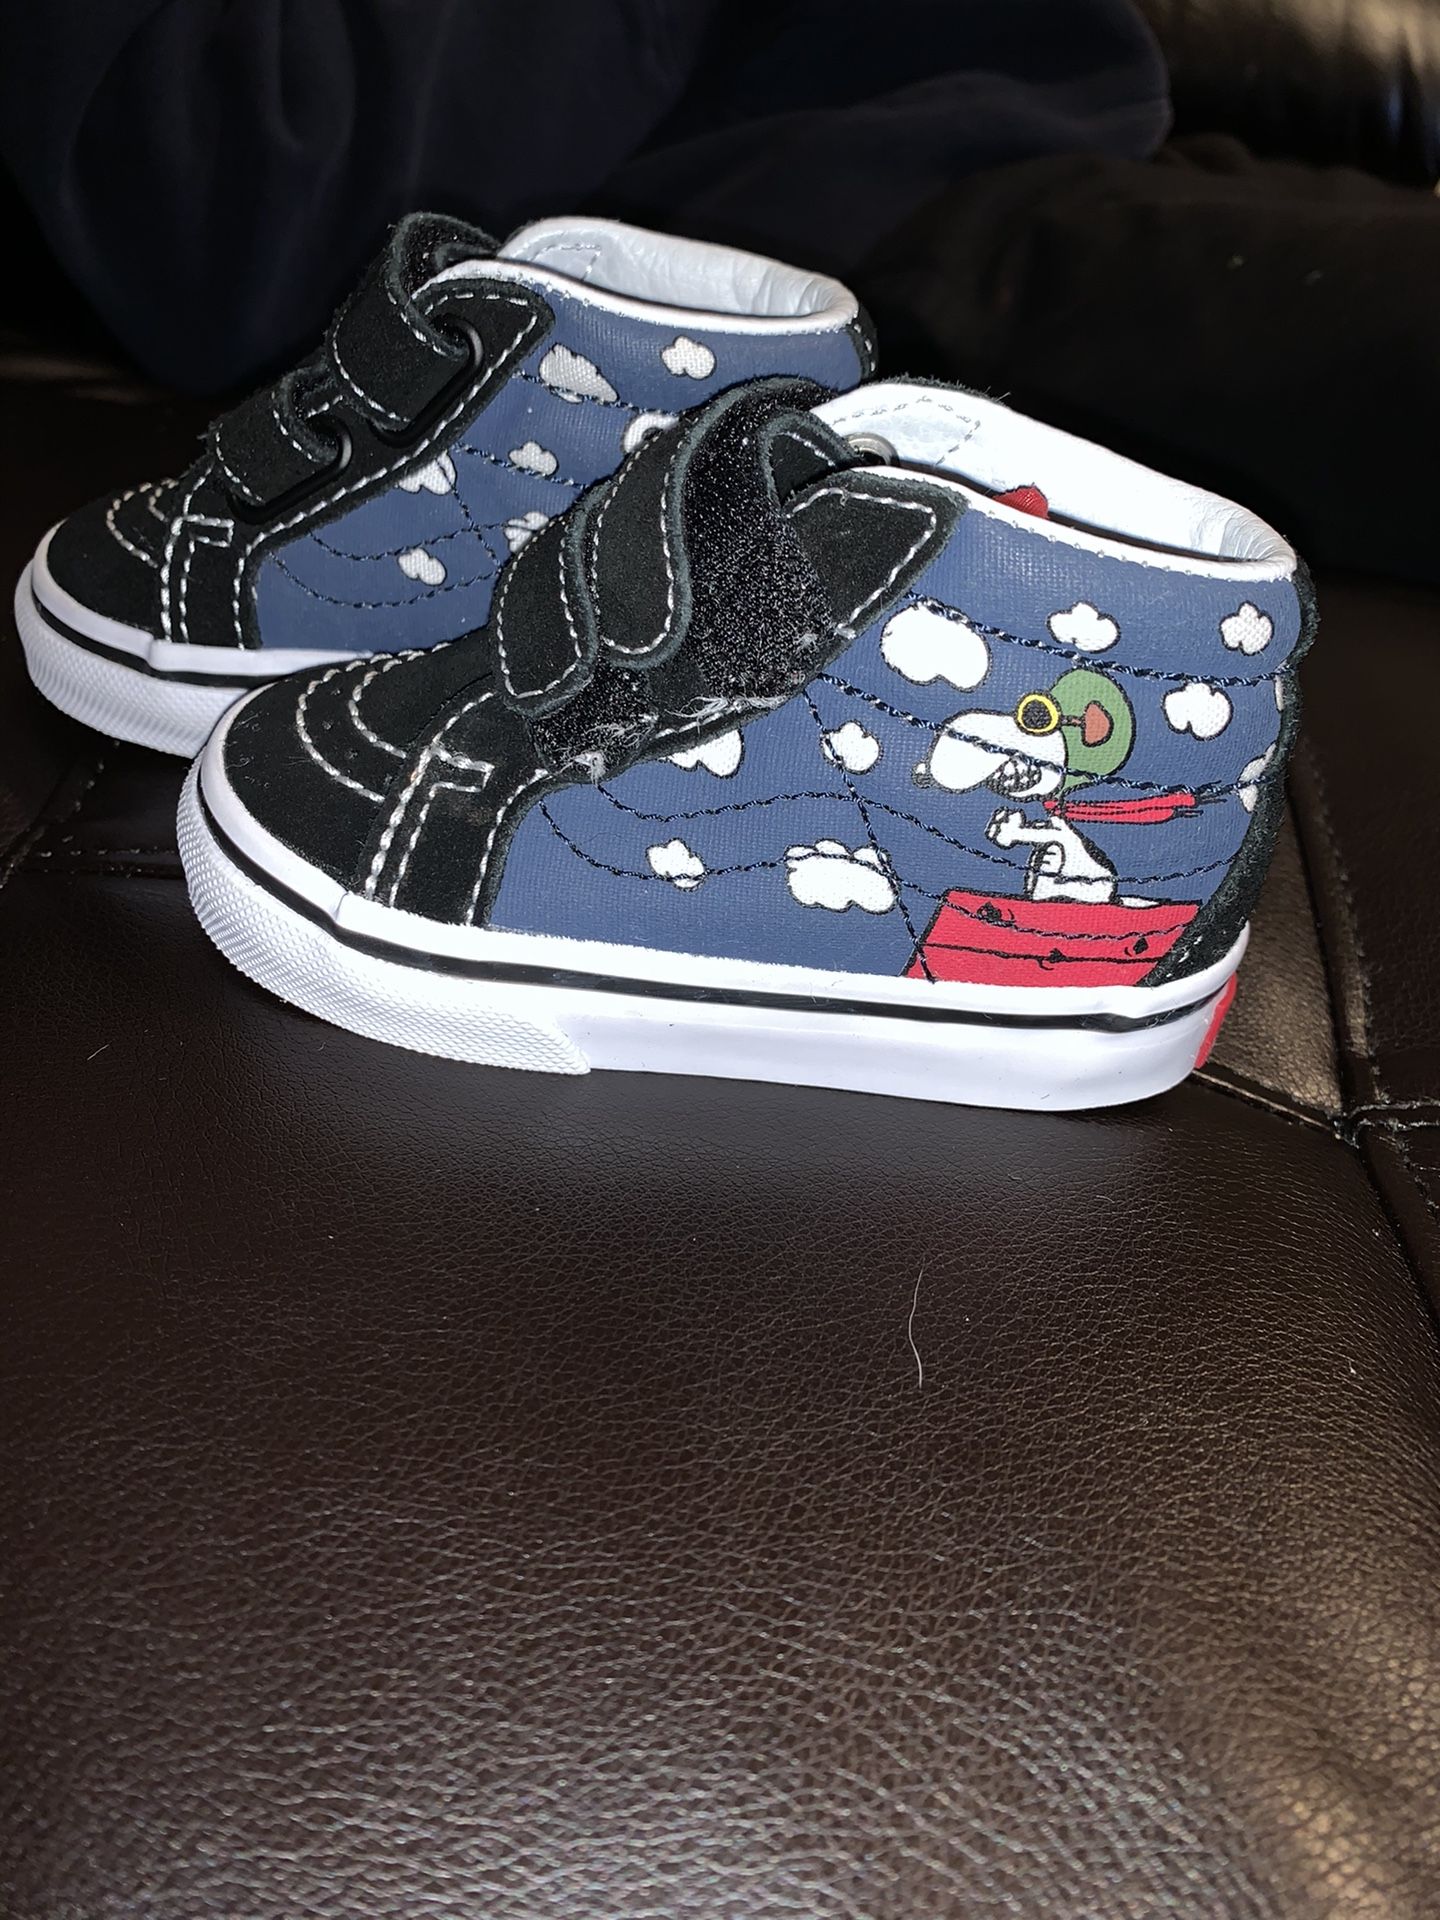 Infant Size 4c Peanuts Snoopy Vans-2 for $30 or 1 for $20